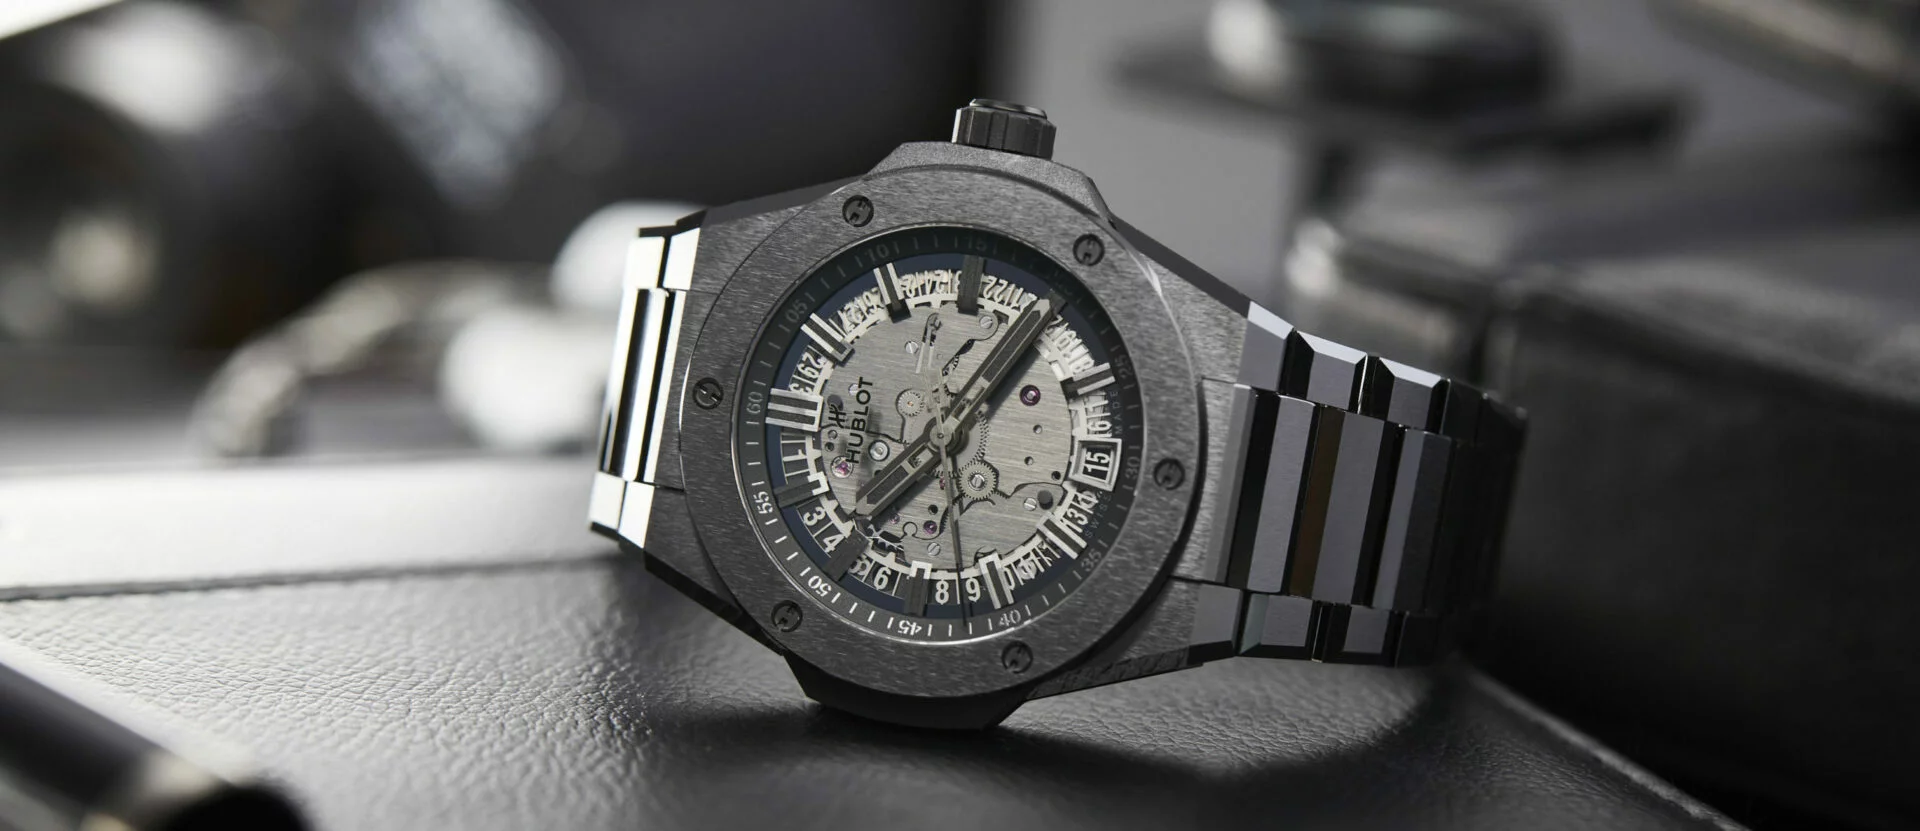 Hublot Big Bang Integrated Time Only Watch